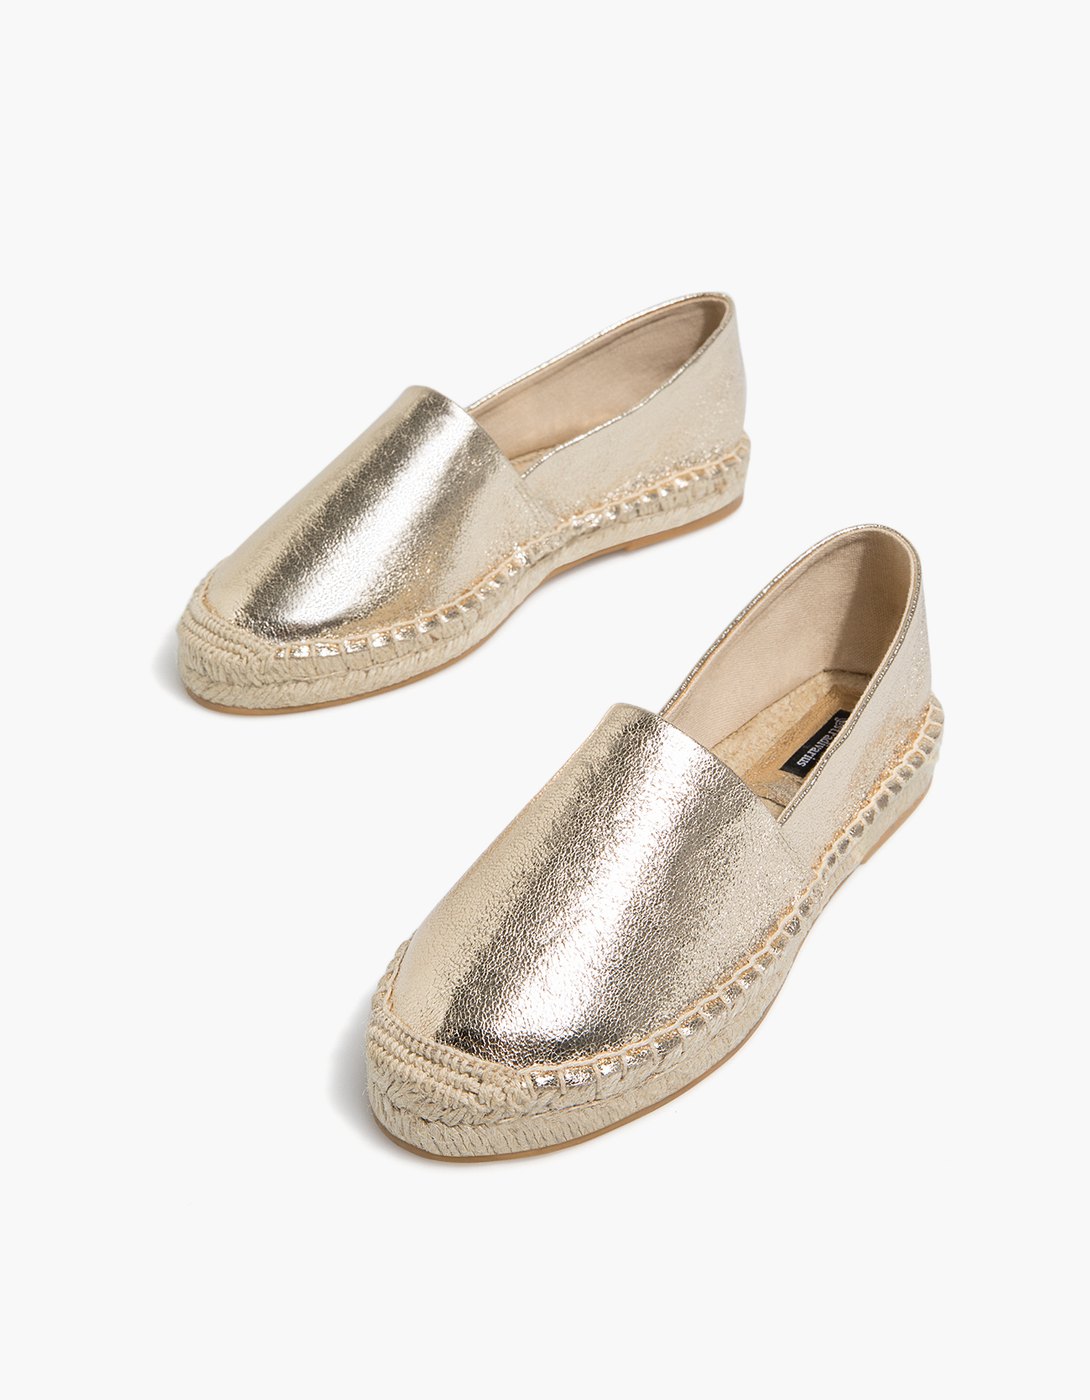 The comfortable and trendy items of this season – The Espadrilles ...